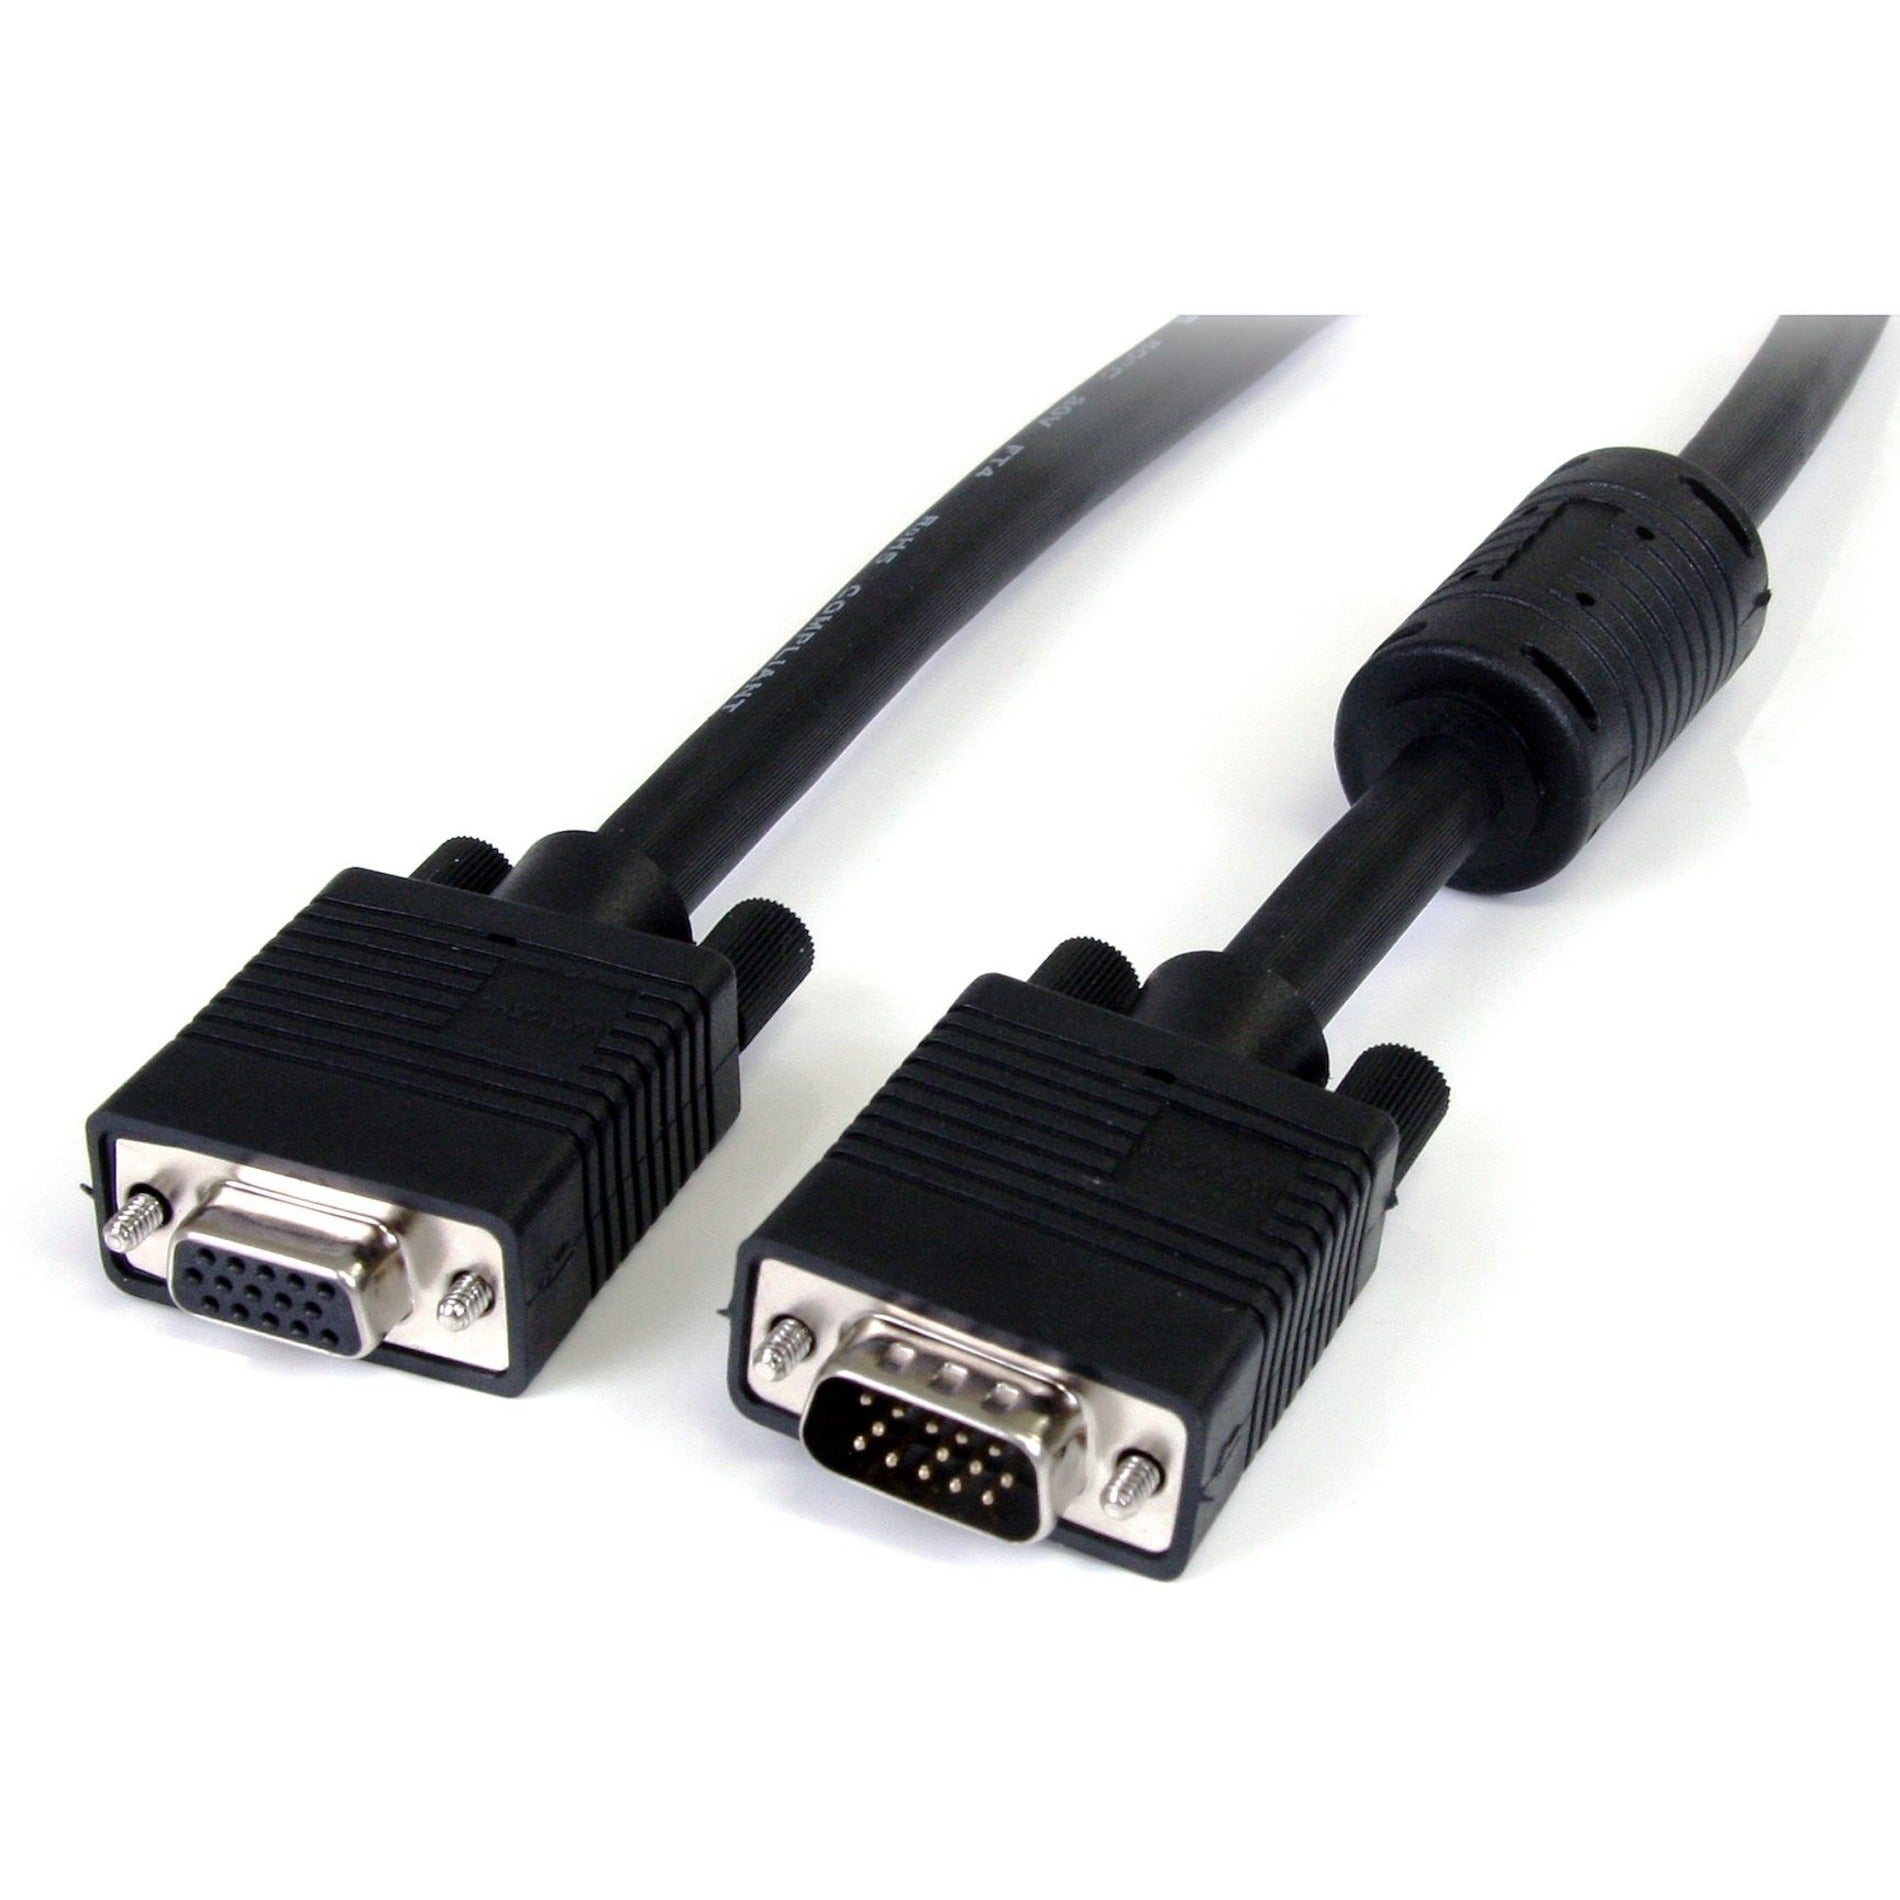 StarTech.com MXT105HQ VGA Monitor Coaxial Extension Cable, 15 ft, Crystal Clear Display